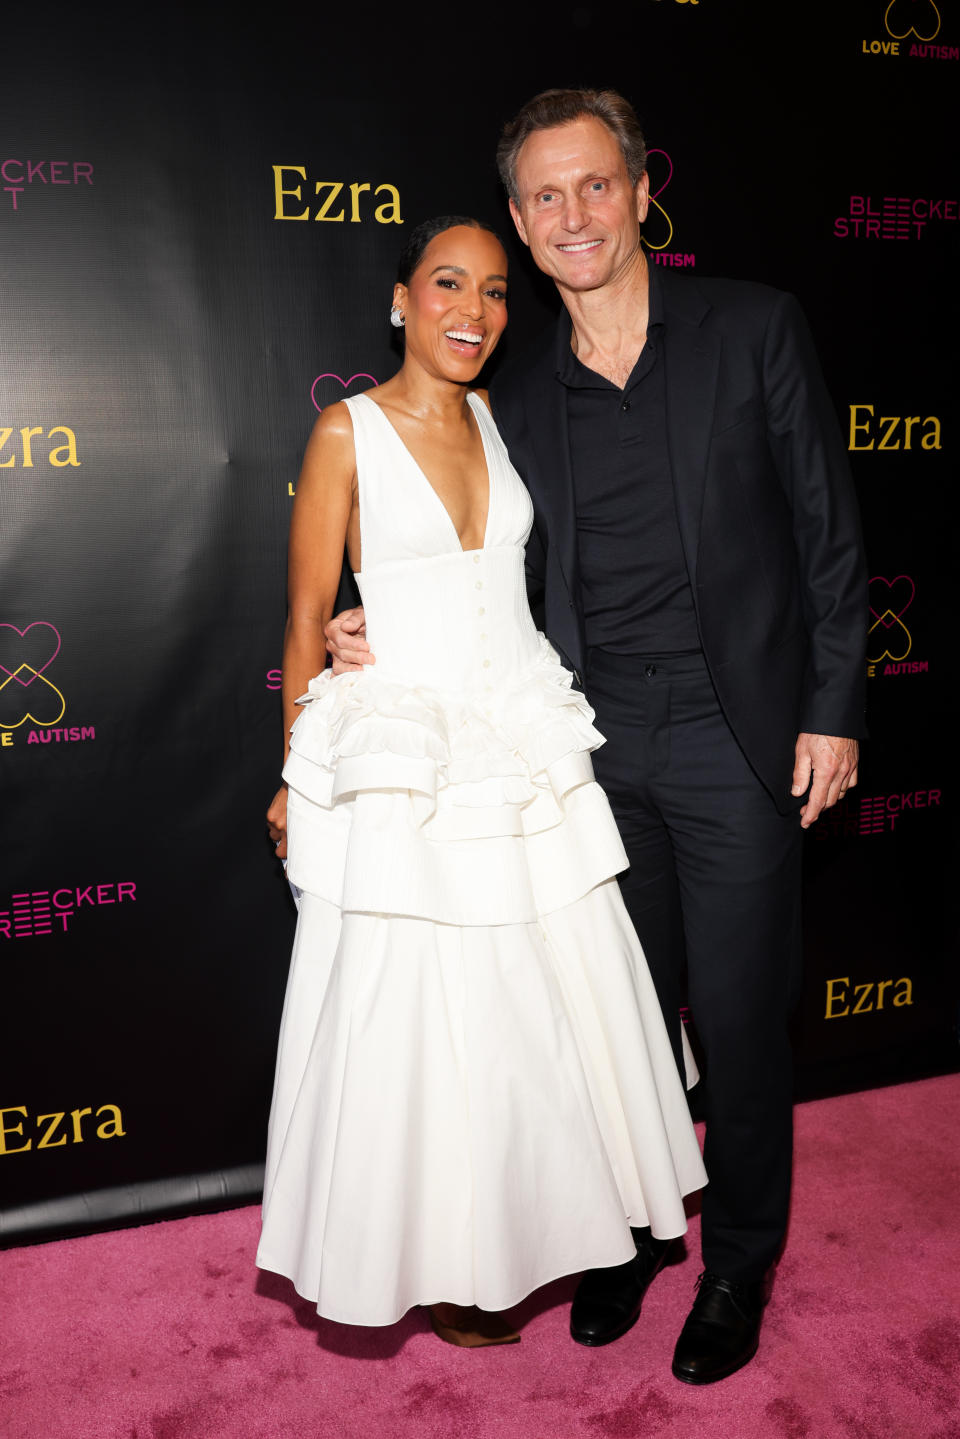 Kerry Washington attends "Ezra" screening in Beverly Hills, Calif. in pointed toe pumps